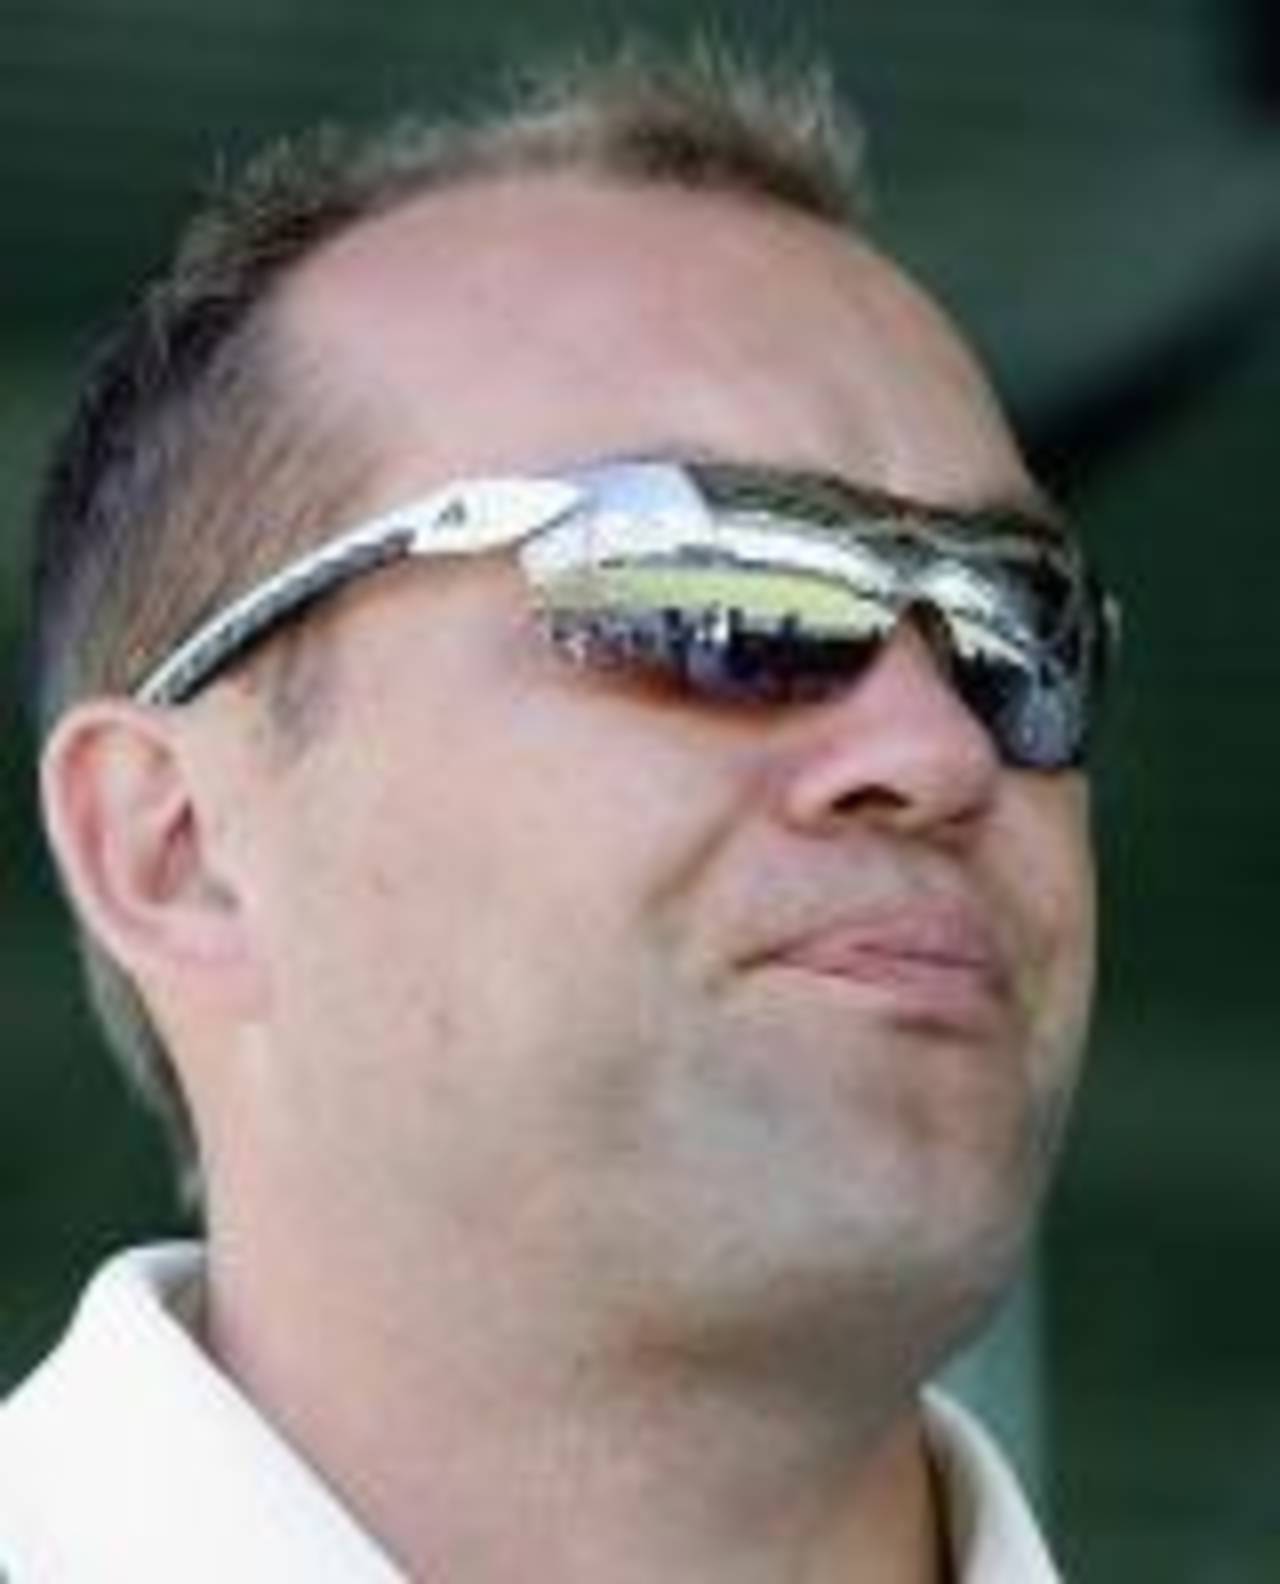 A rather miffed Jacques Kallis looks on as his side crash to an innings defeat, Western Australia v South Africa, WACA, Perth, December 7, 2005